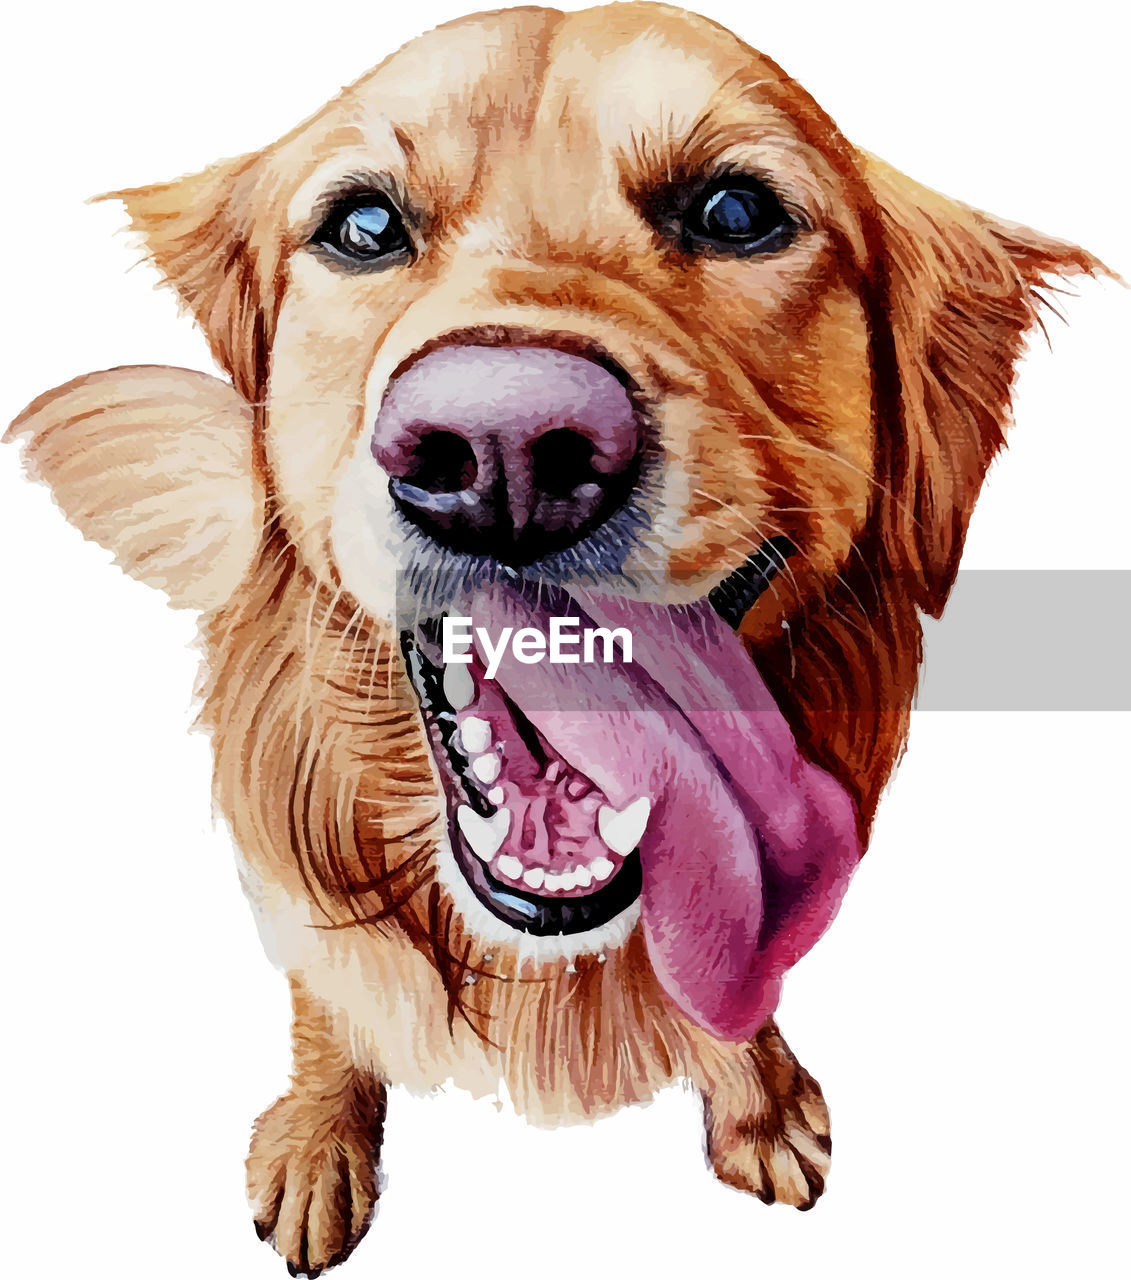 CLOSE-UP OF A DOG OVER WHITE BACKGROUND